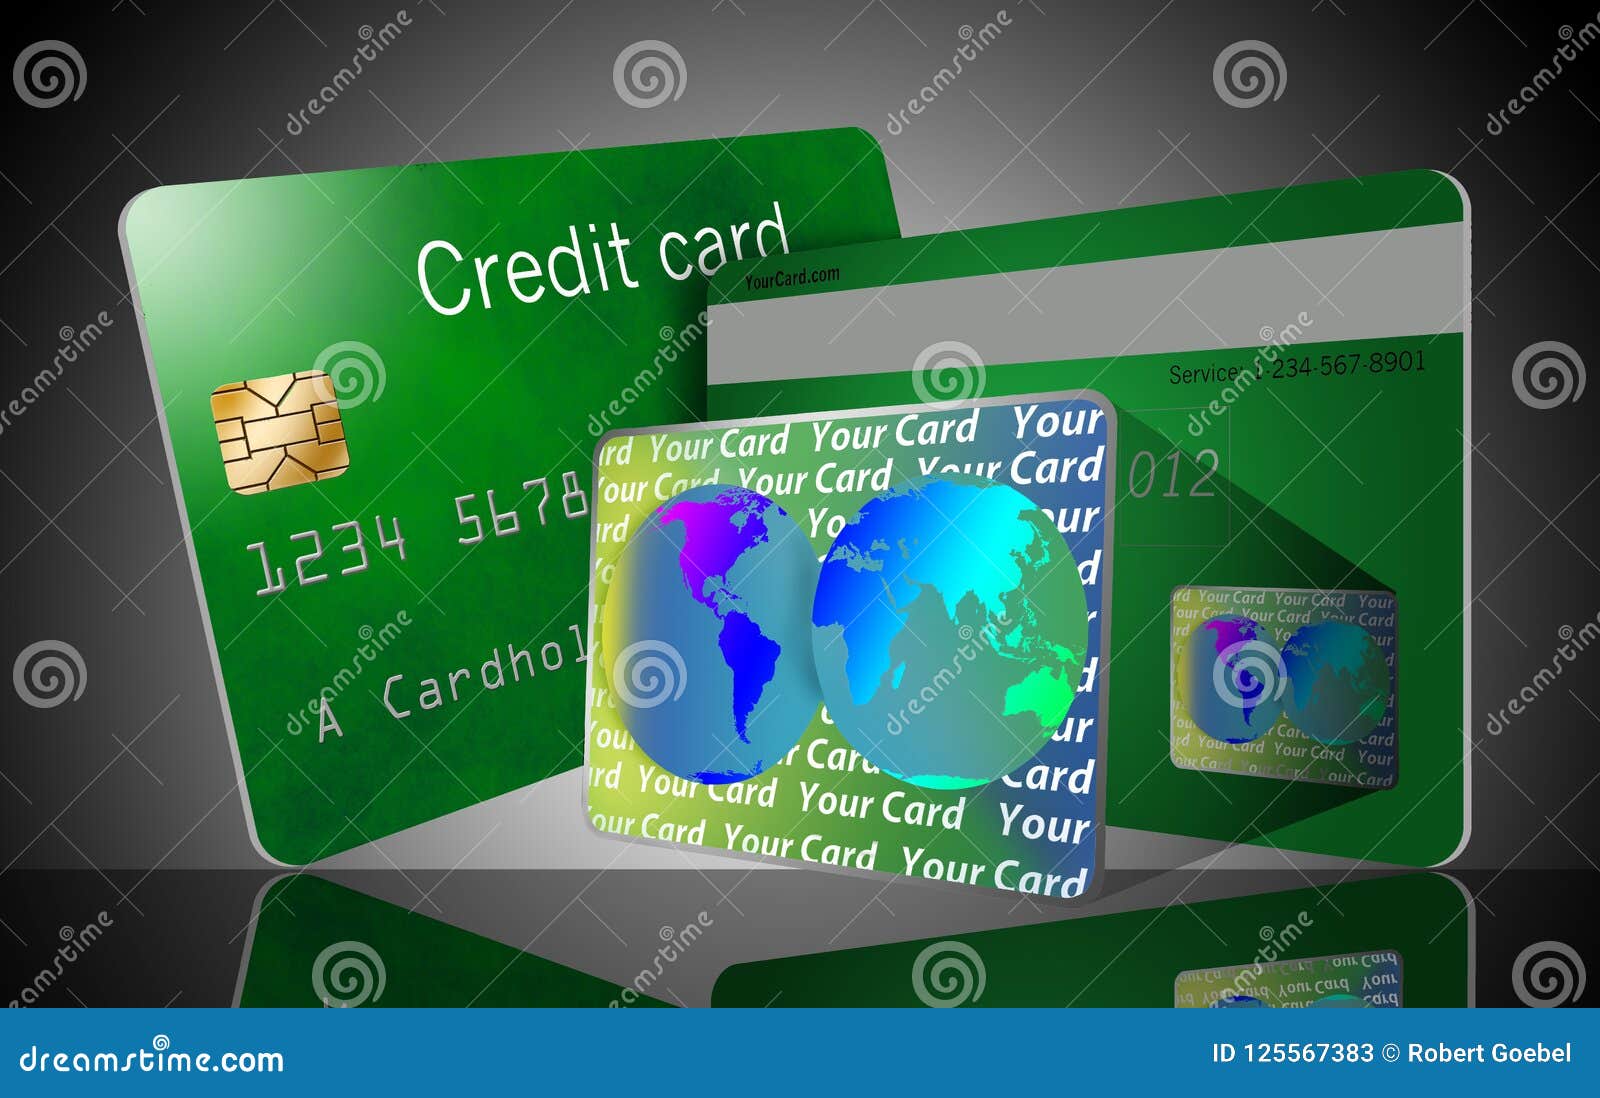 A Security Hologram On A Credit Card Is Seen Here. Stock Illustration - Illustration of numbers ...